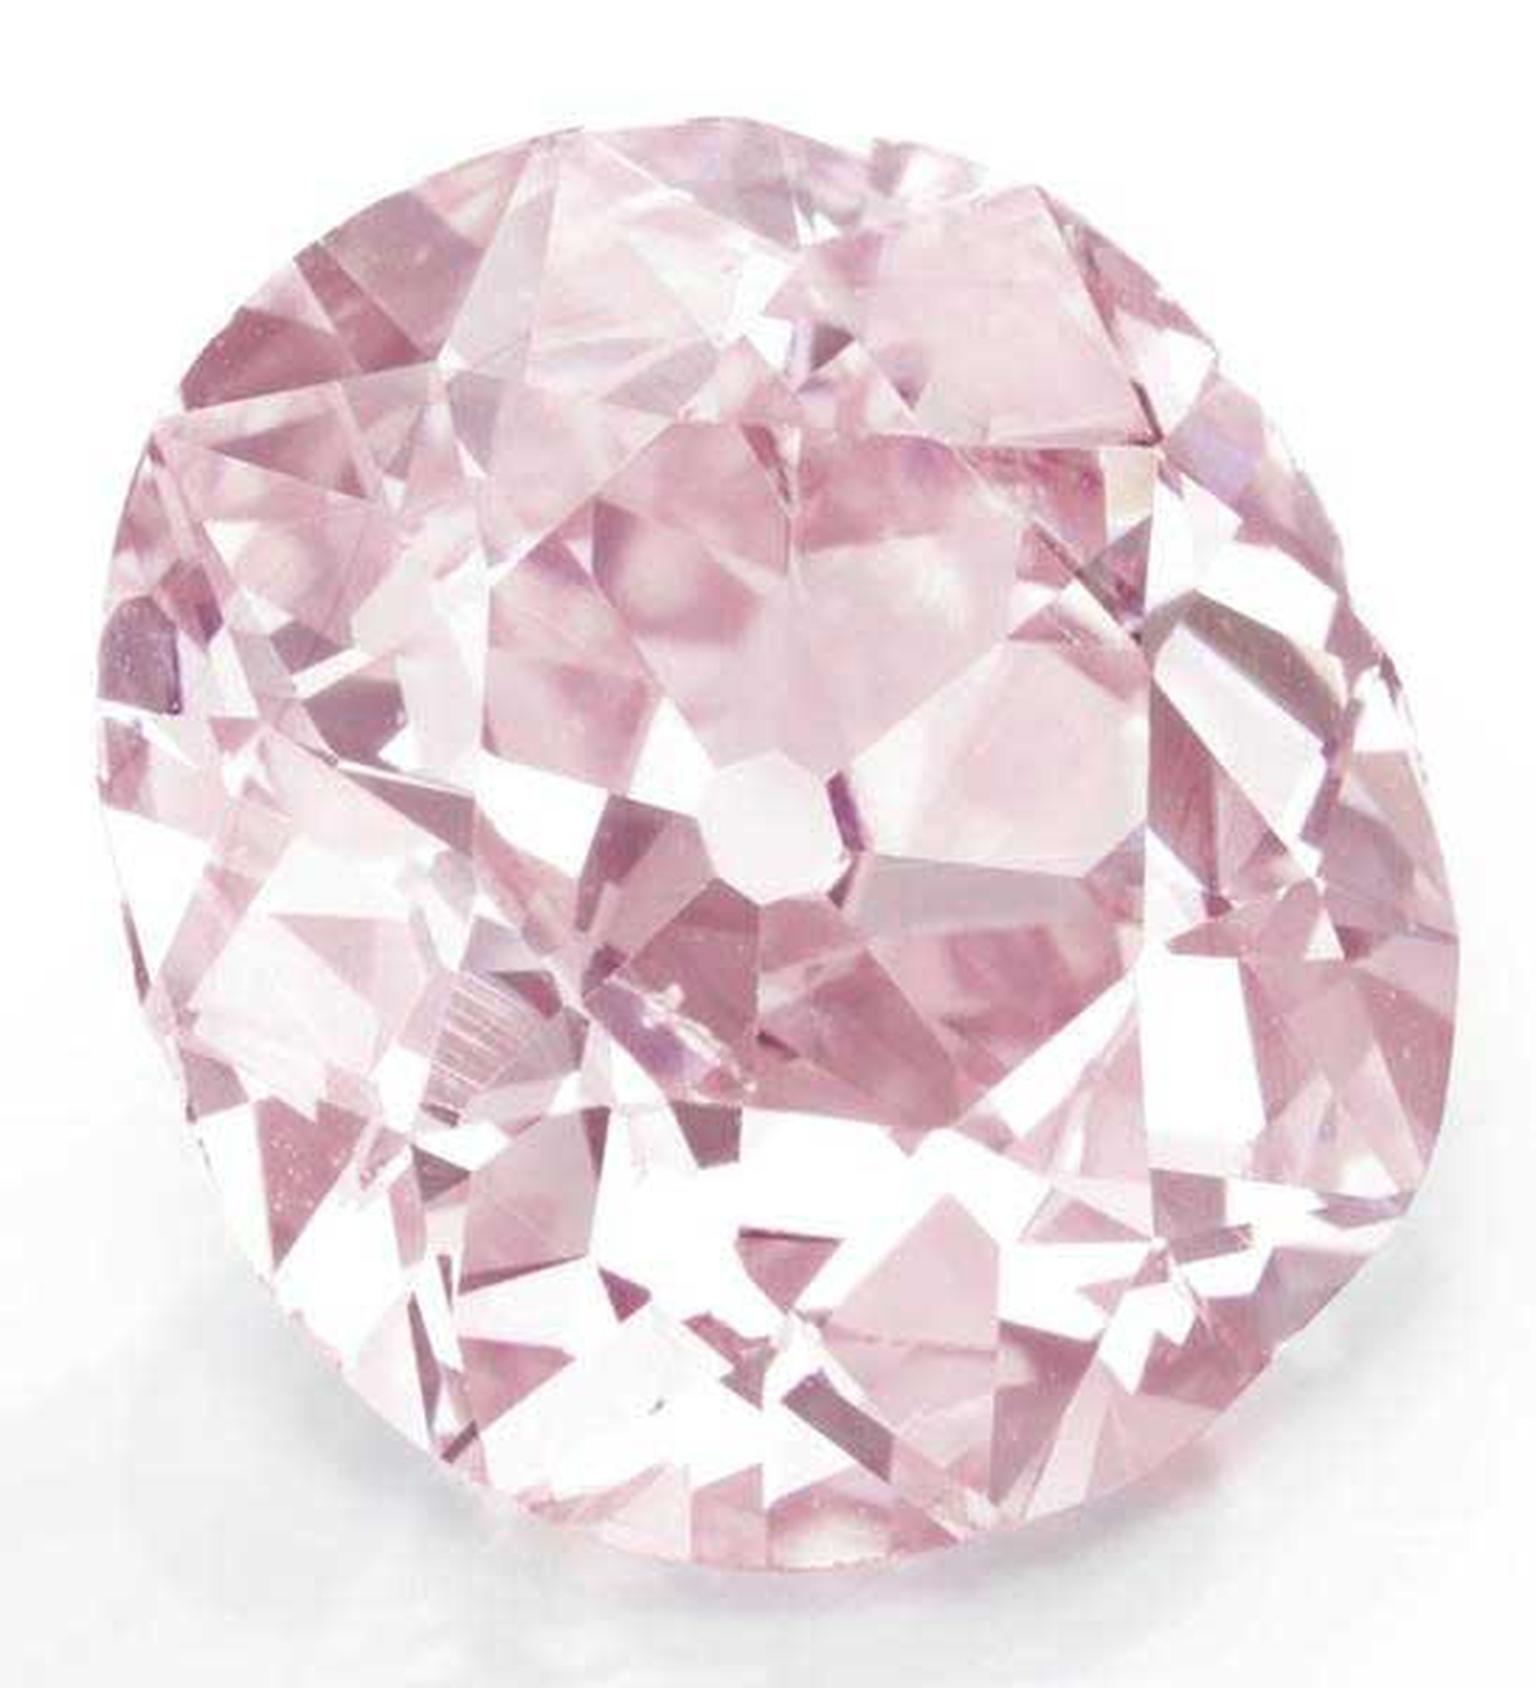 In 2012, Christie's New York sold a ring set with this 9.00 carat pink diamond from the turn-of-the-century from the estate of Huguette M. Clark for $15.7 million, making it the most valuable pink diamond ever sold at auction in America.